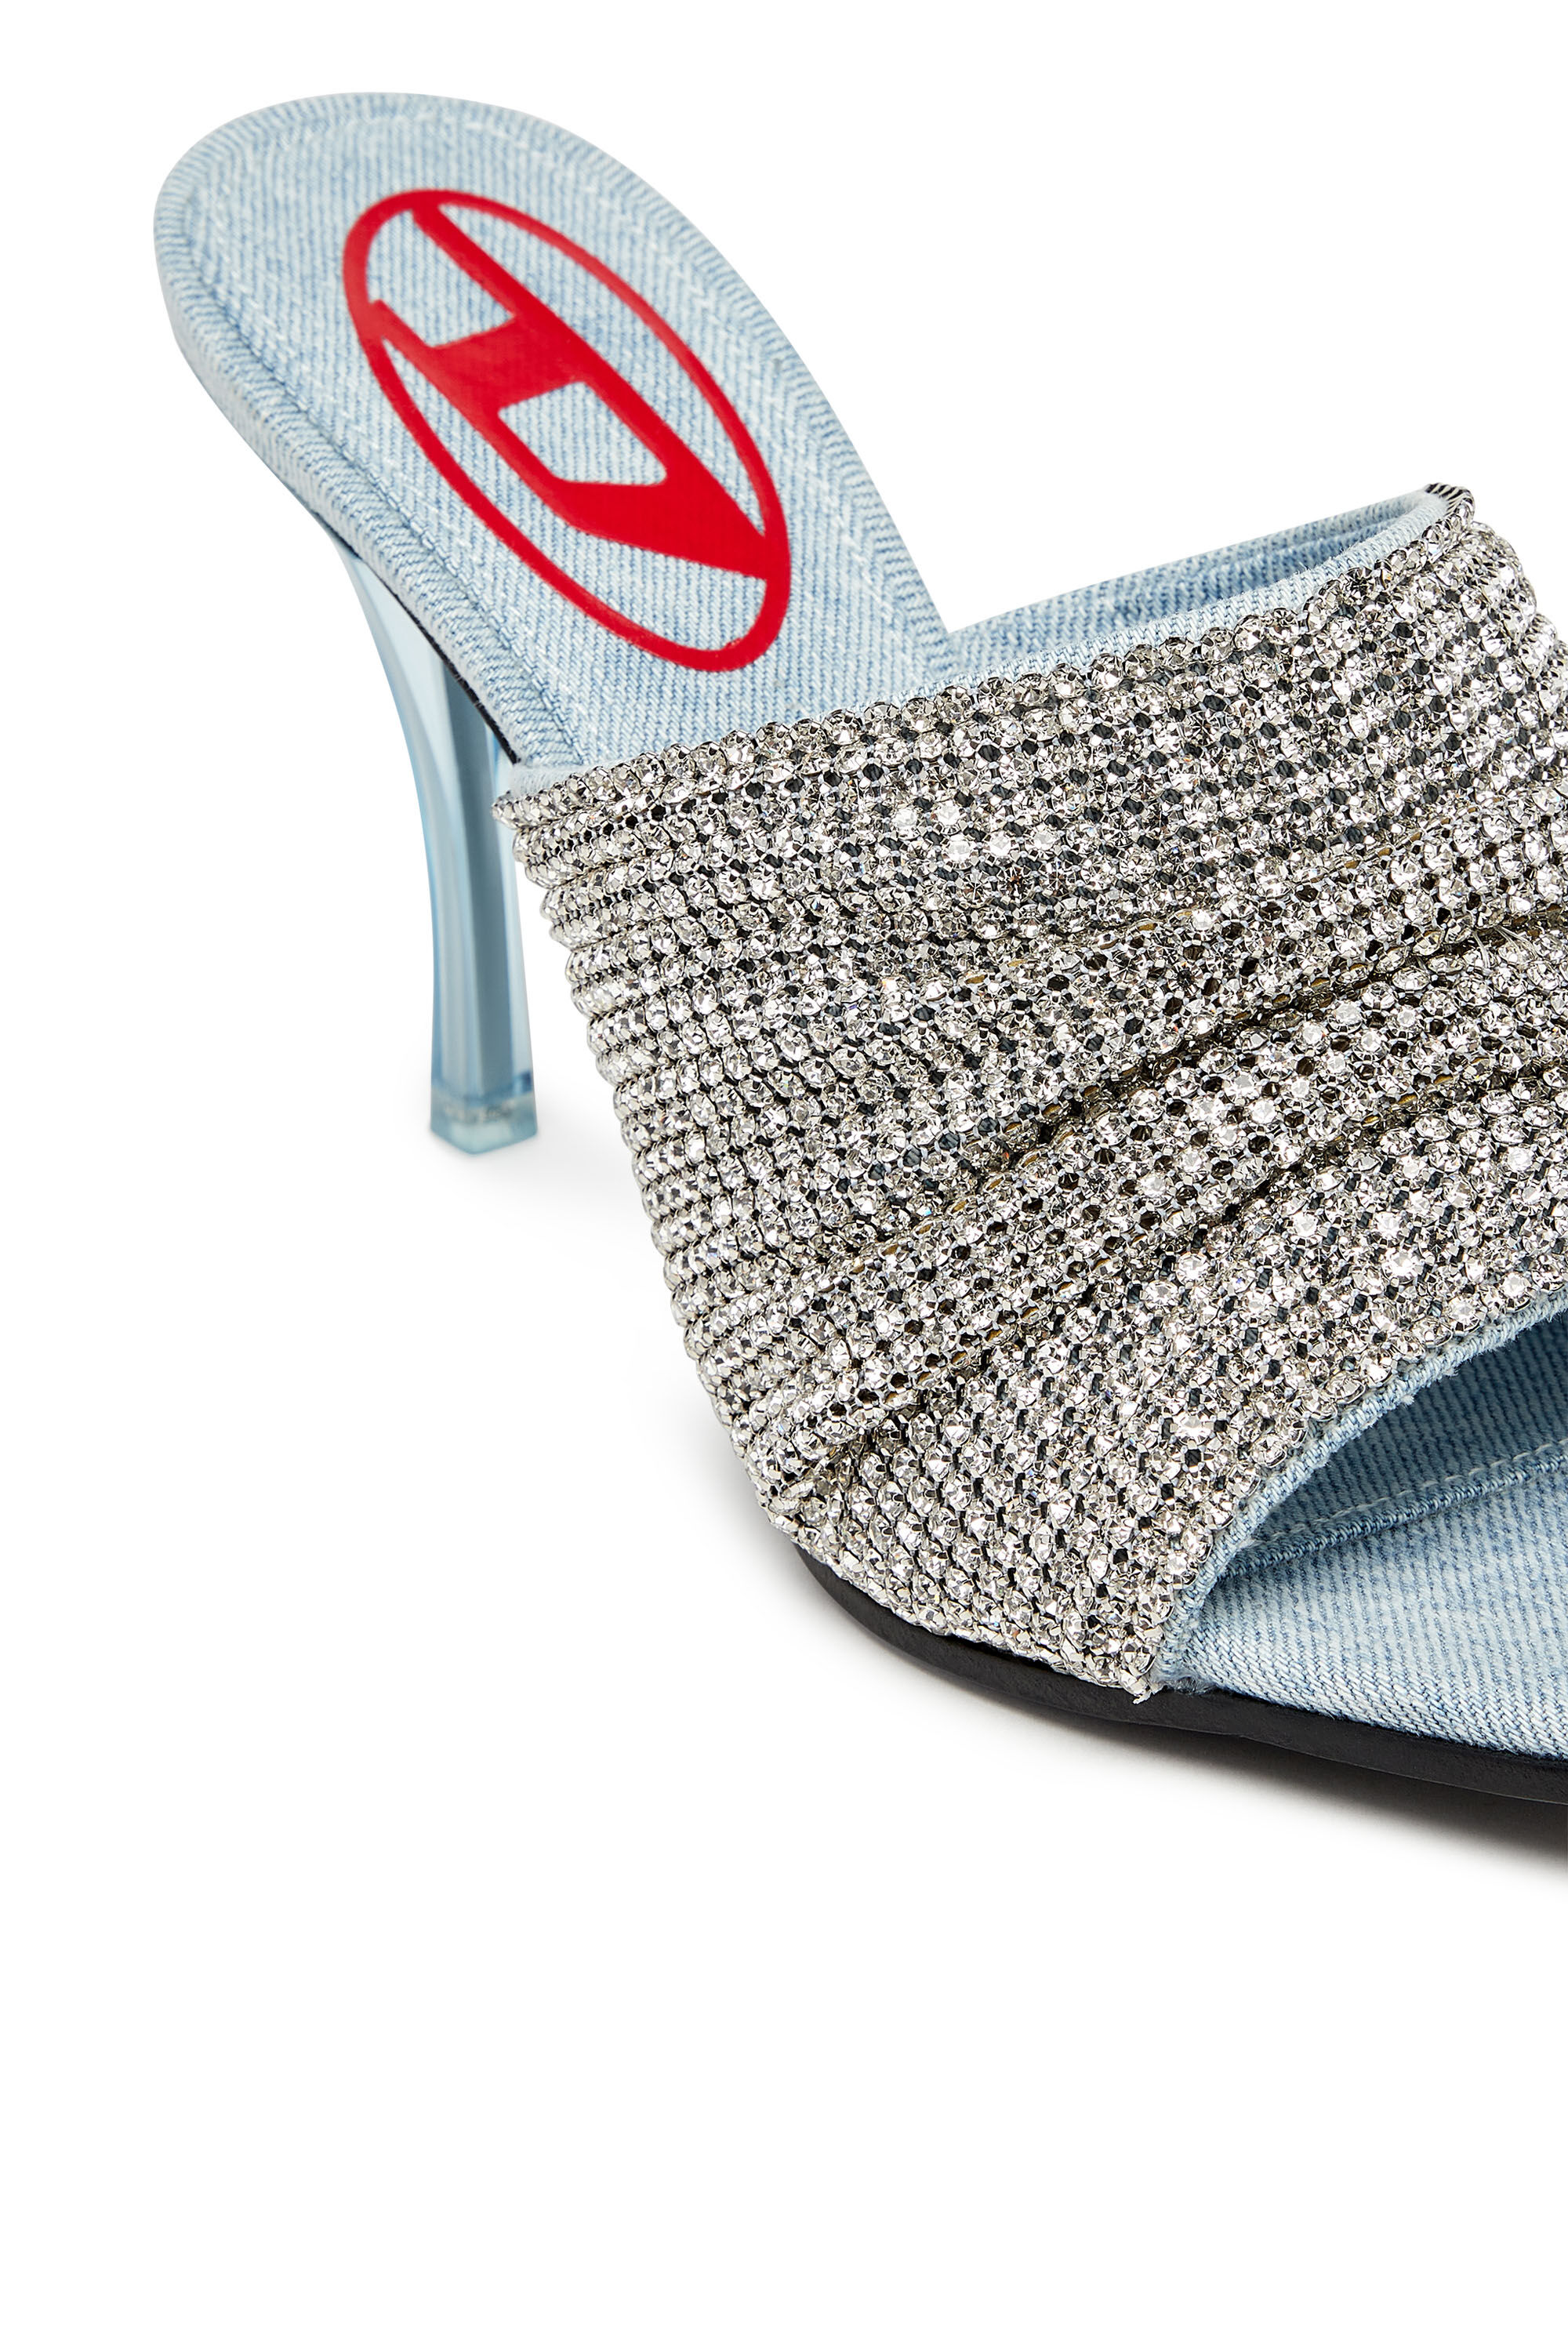 Diesel - D-SYDNEY SDL S, Woman D-Sydney Sdl S Sandals - Mule sandals with rhinestone band in Silver - Image 4